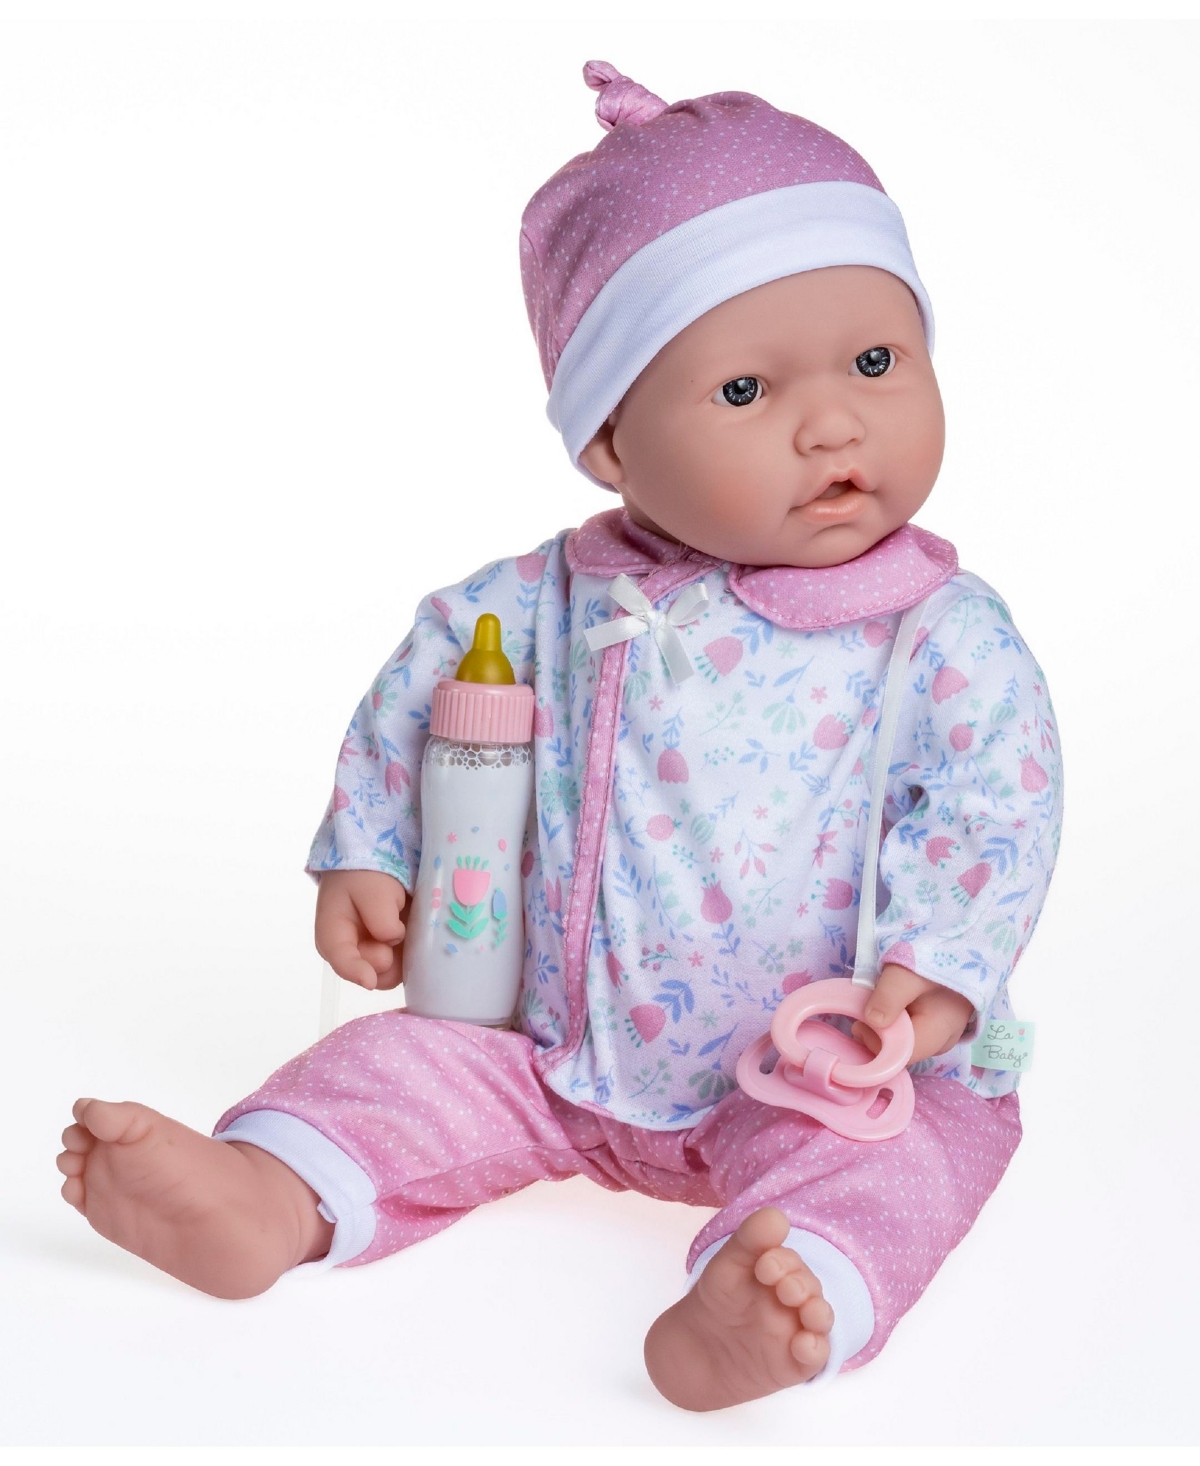 Jc Toys Kids' La Baby 17" Soft Body Baby Doll 3-piece Outfit With Pacifier, Magic Bottle Set In Multicolor